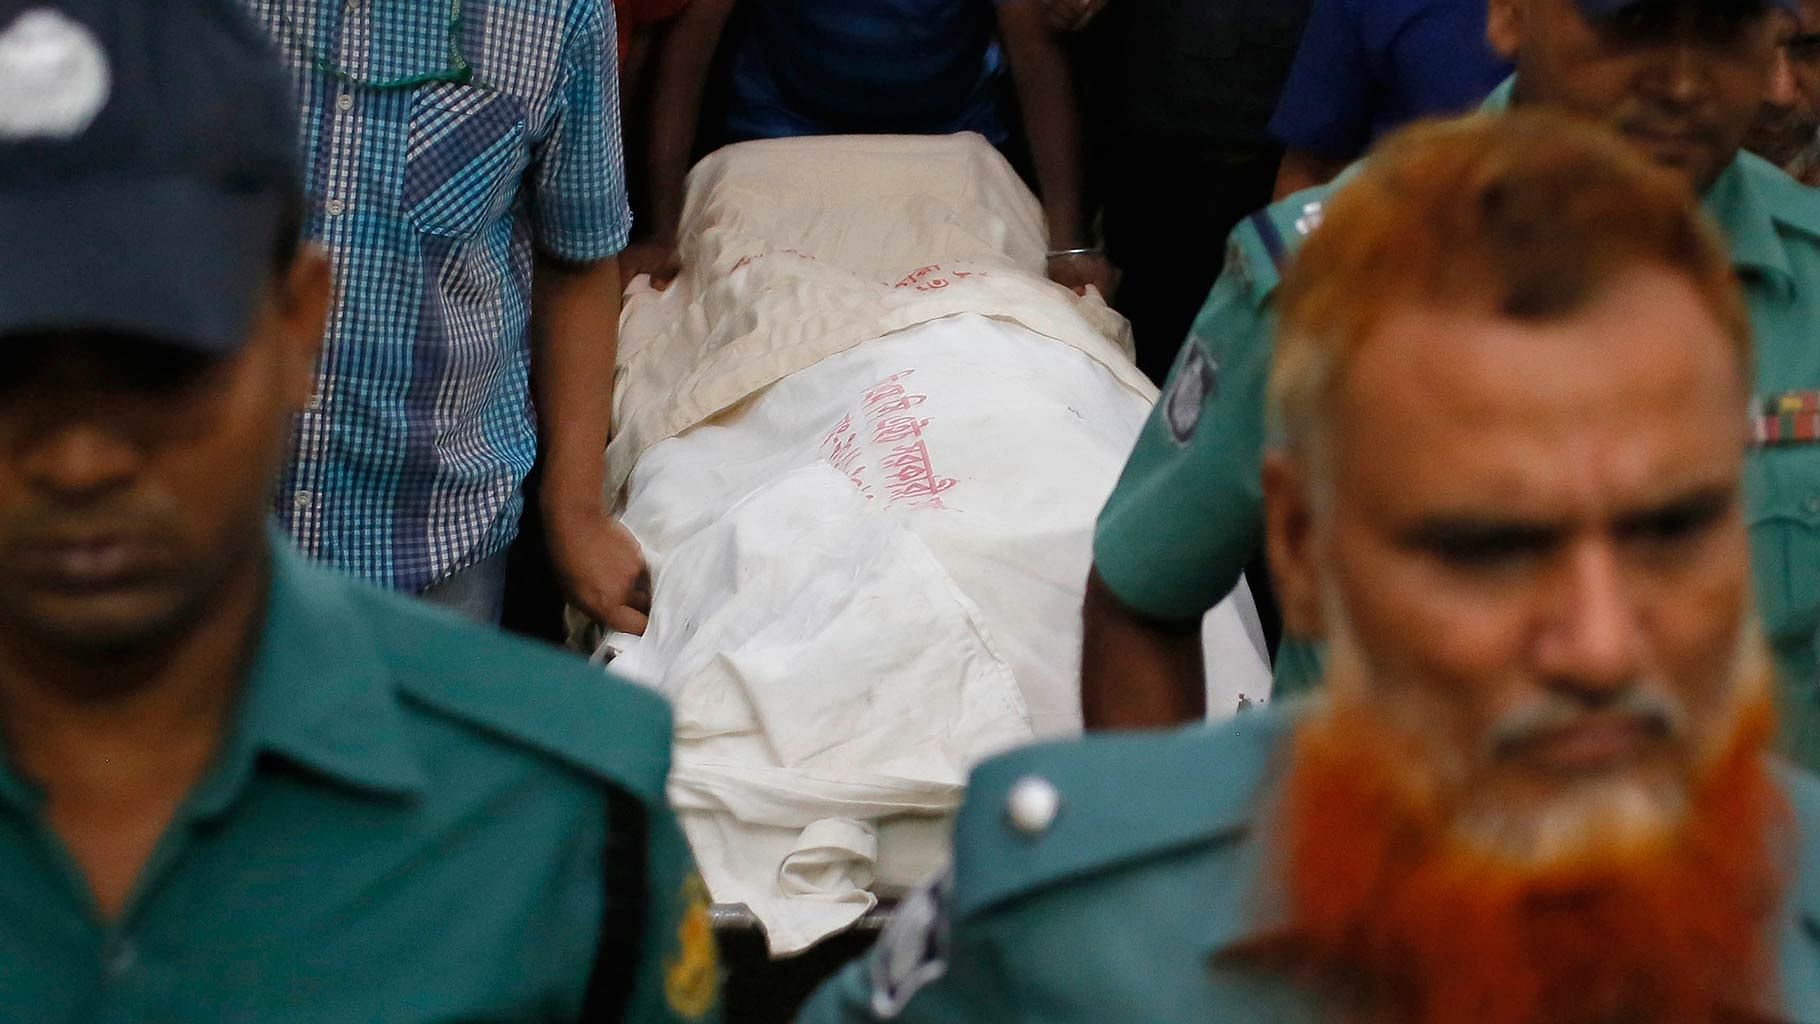 The body of book publisher Faisal Arefin Deepan is carried on a stretcher at Dhaka Medical College Hospital in October 2015. (Photo: AP)